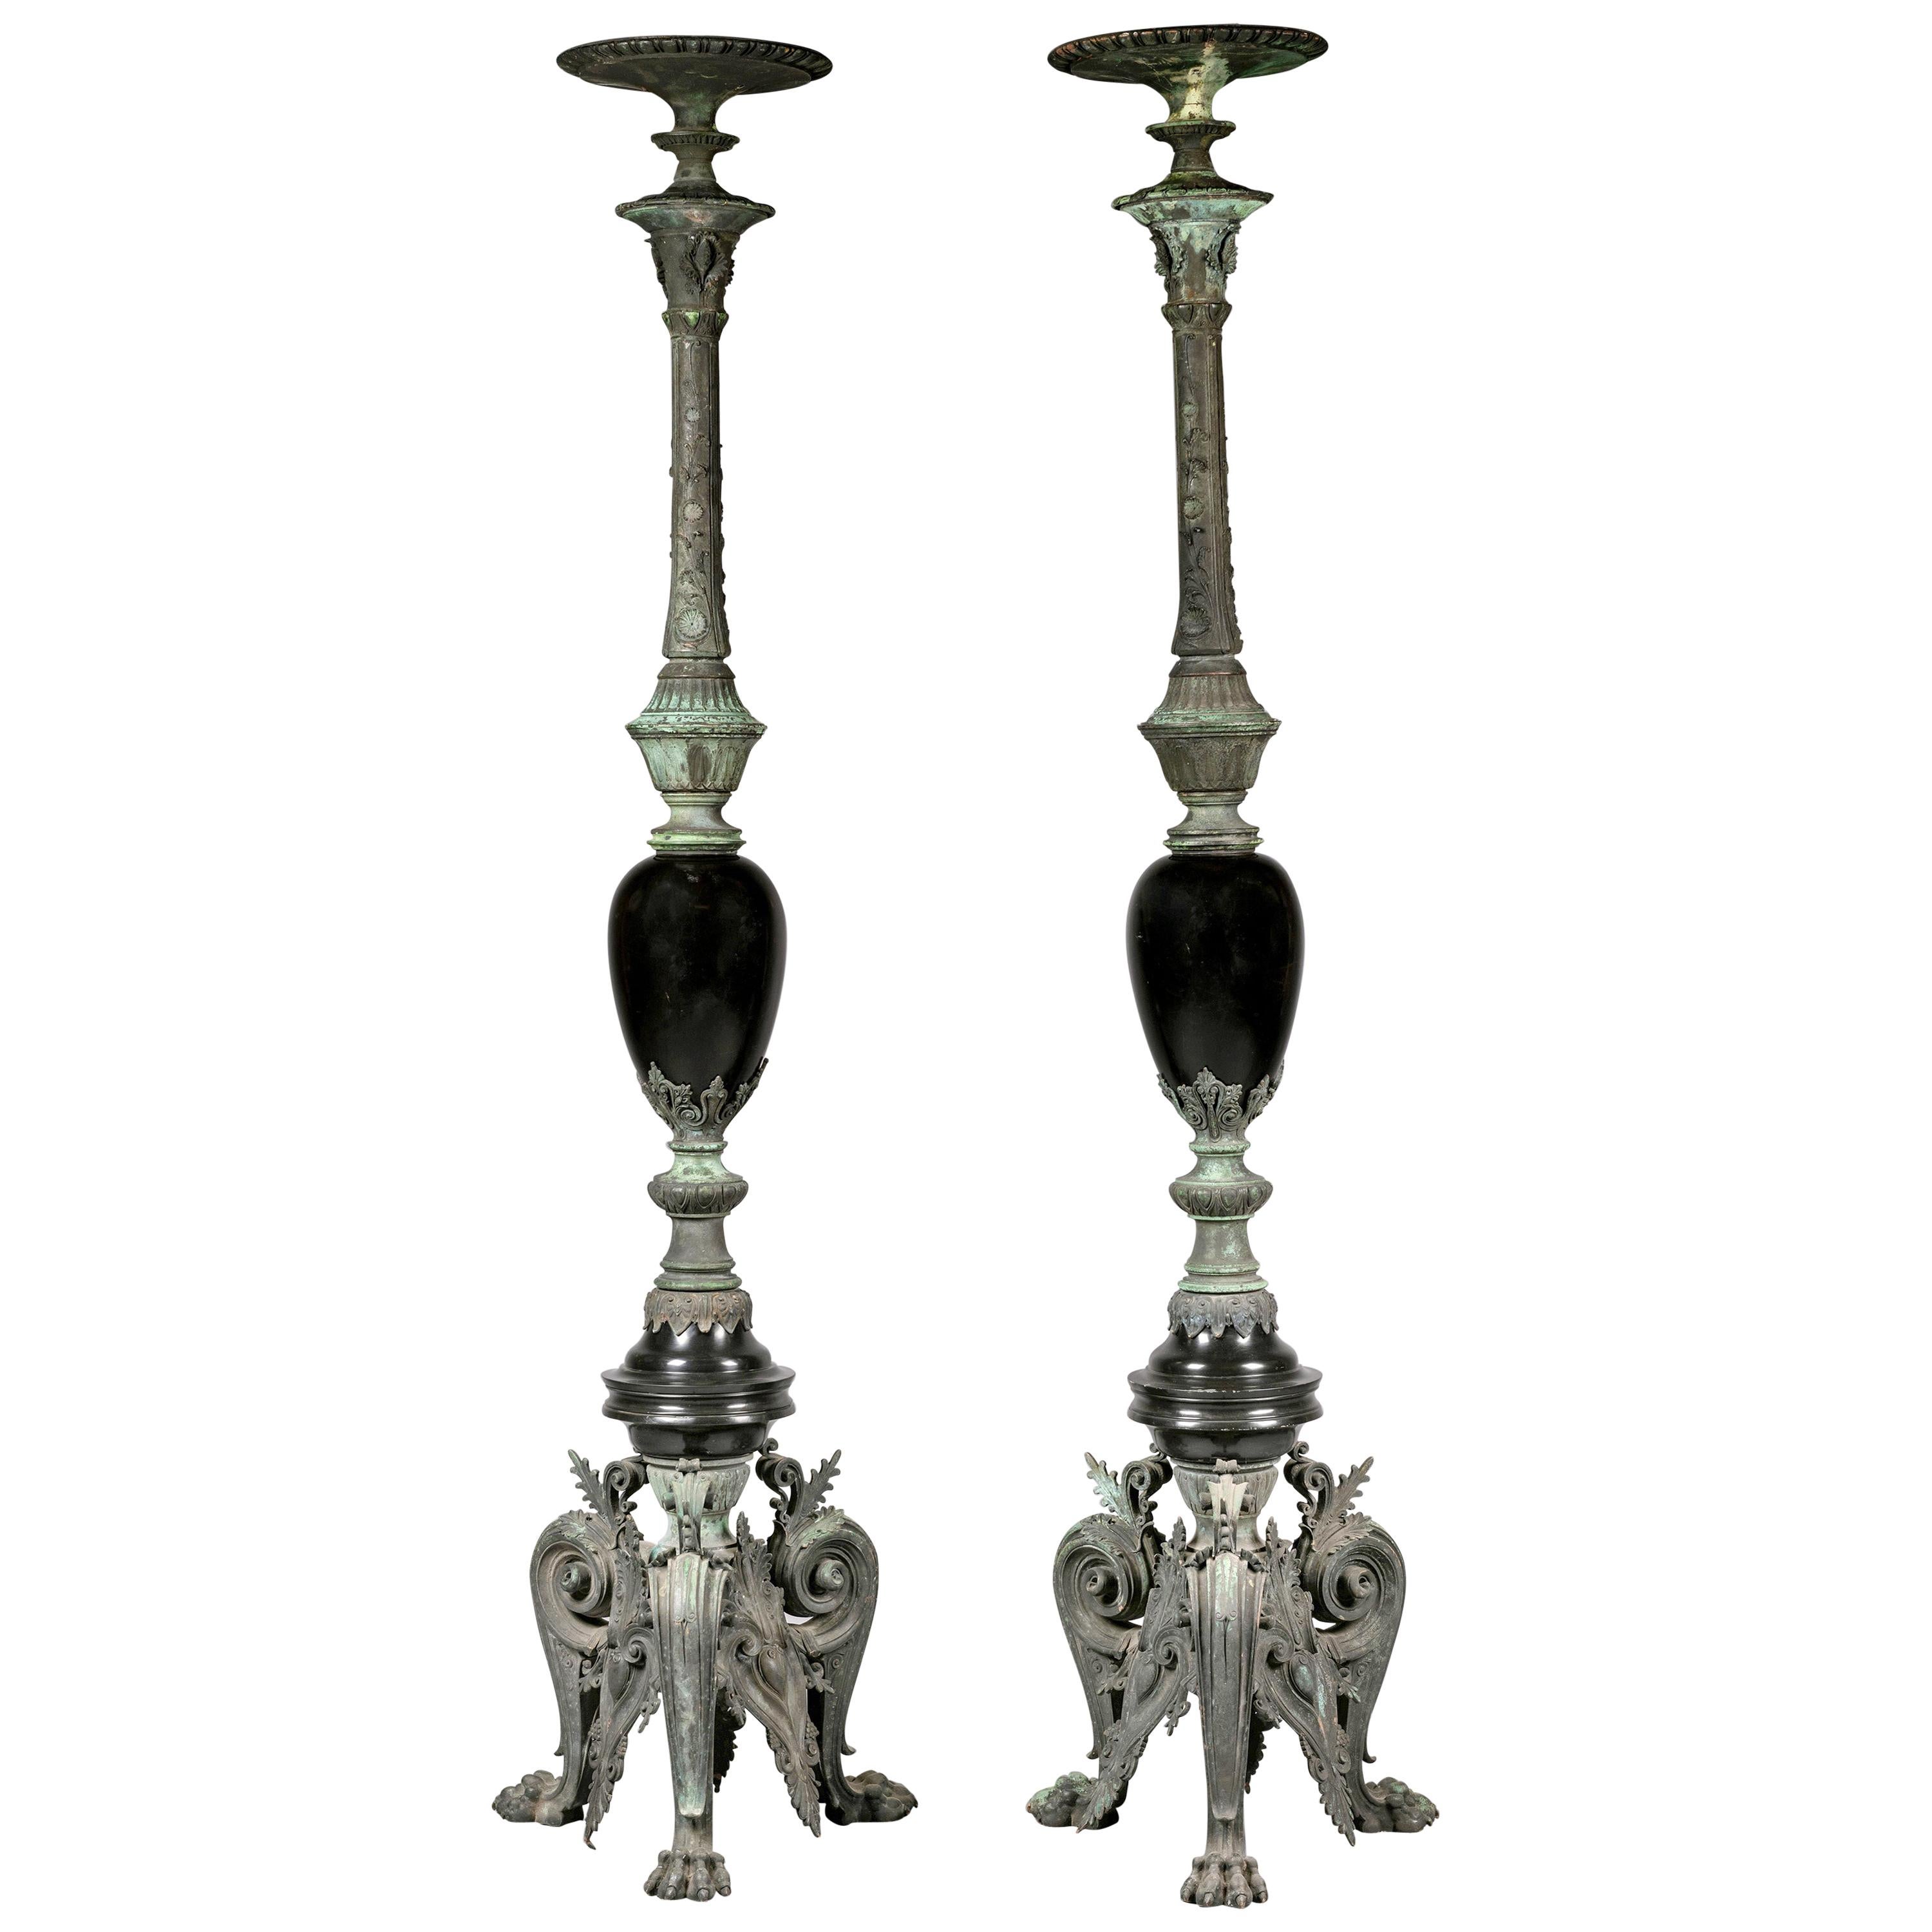 Pair of Porte-Torchères in the Manner of Barbedienne